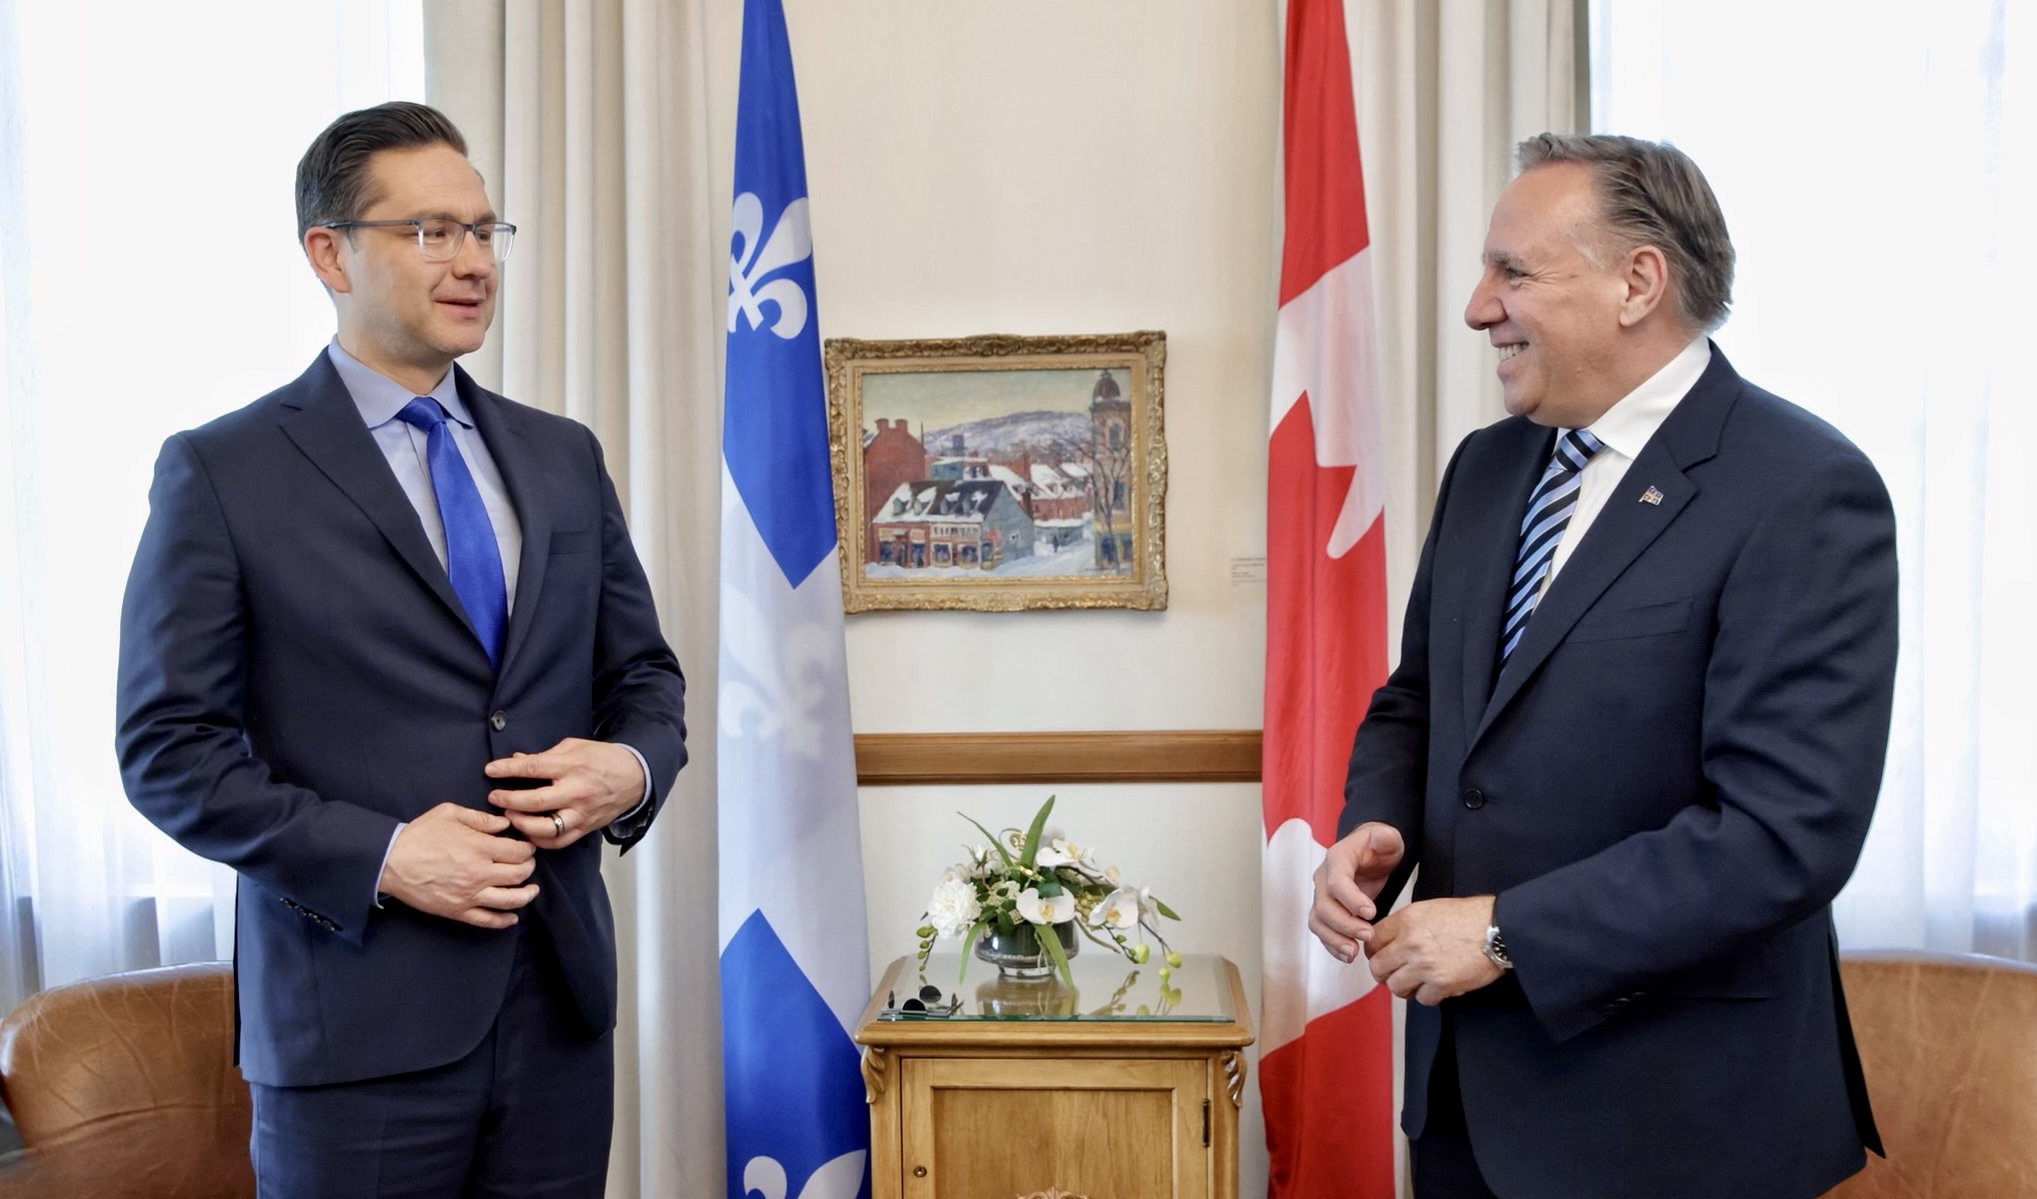 Legault spoke with Pierre Poilievre today about immigration, “decline of the French language”